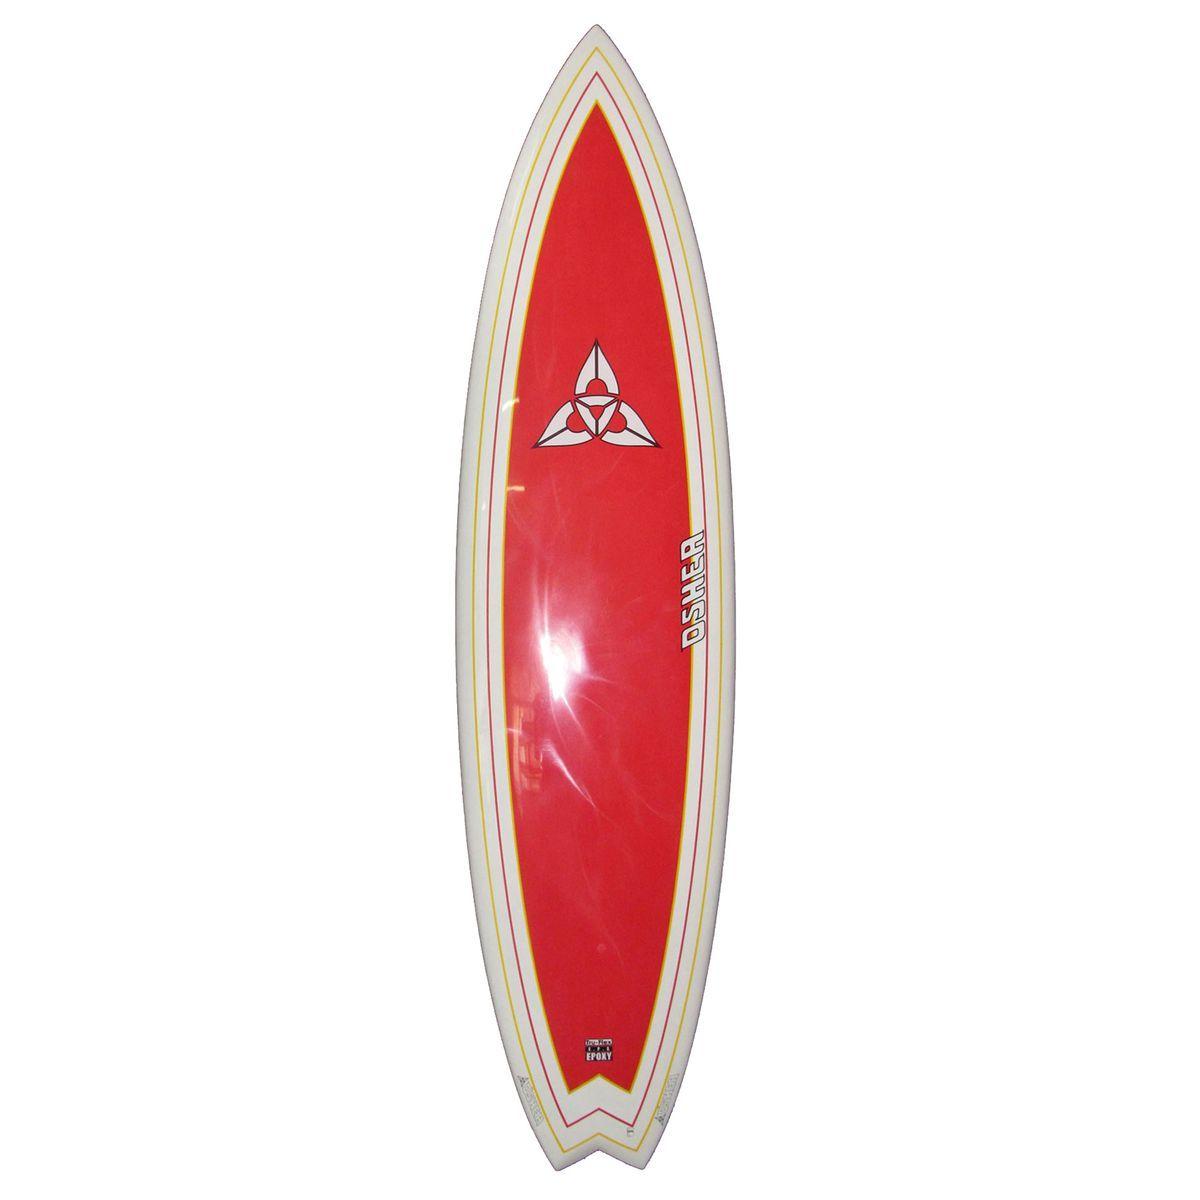 Red Surfboard Logo - O'Shea Fat Boy EPS Red Surfboard 2. Free Delivery options